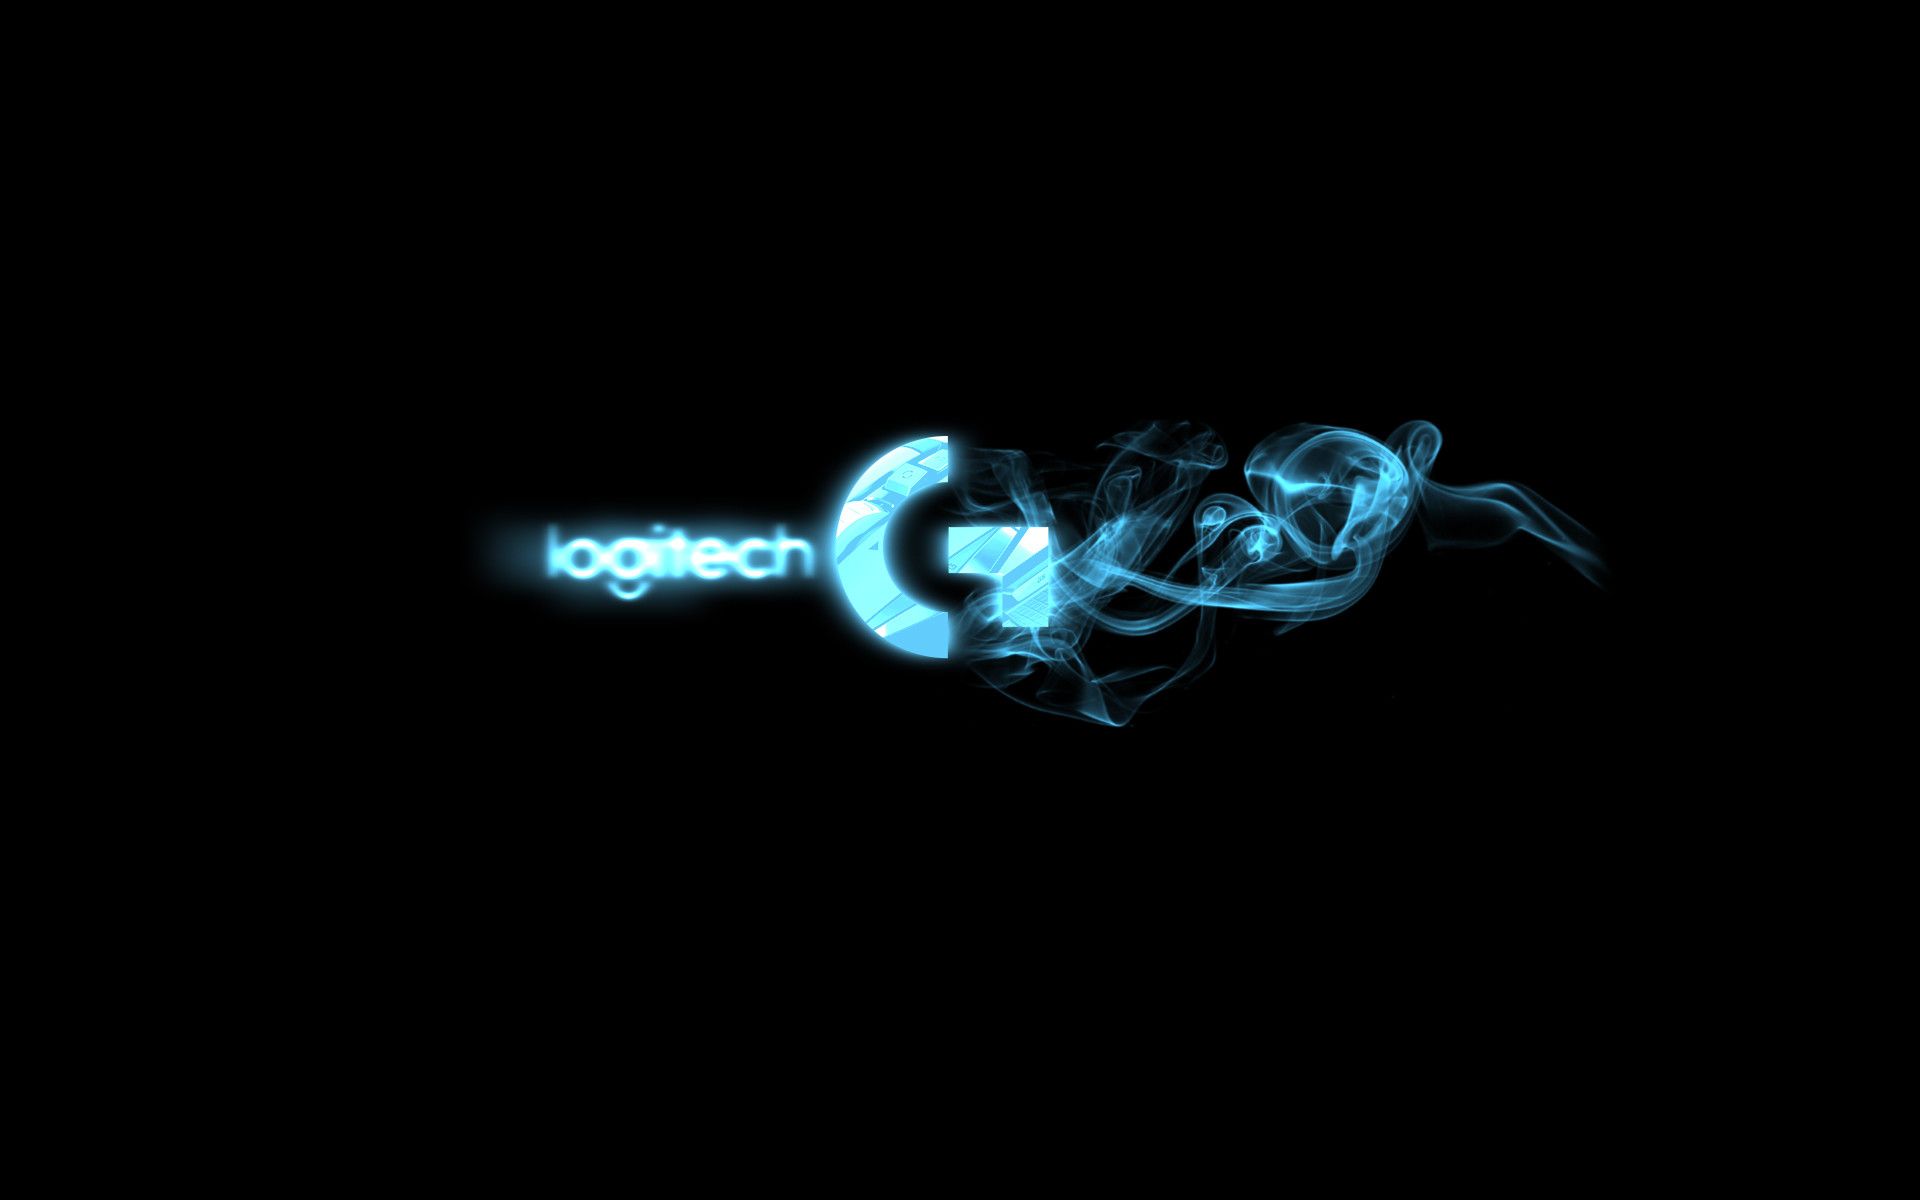 Amazing Logitech Wallpaper For iPhone 5s Bn In